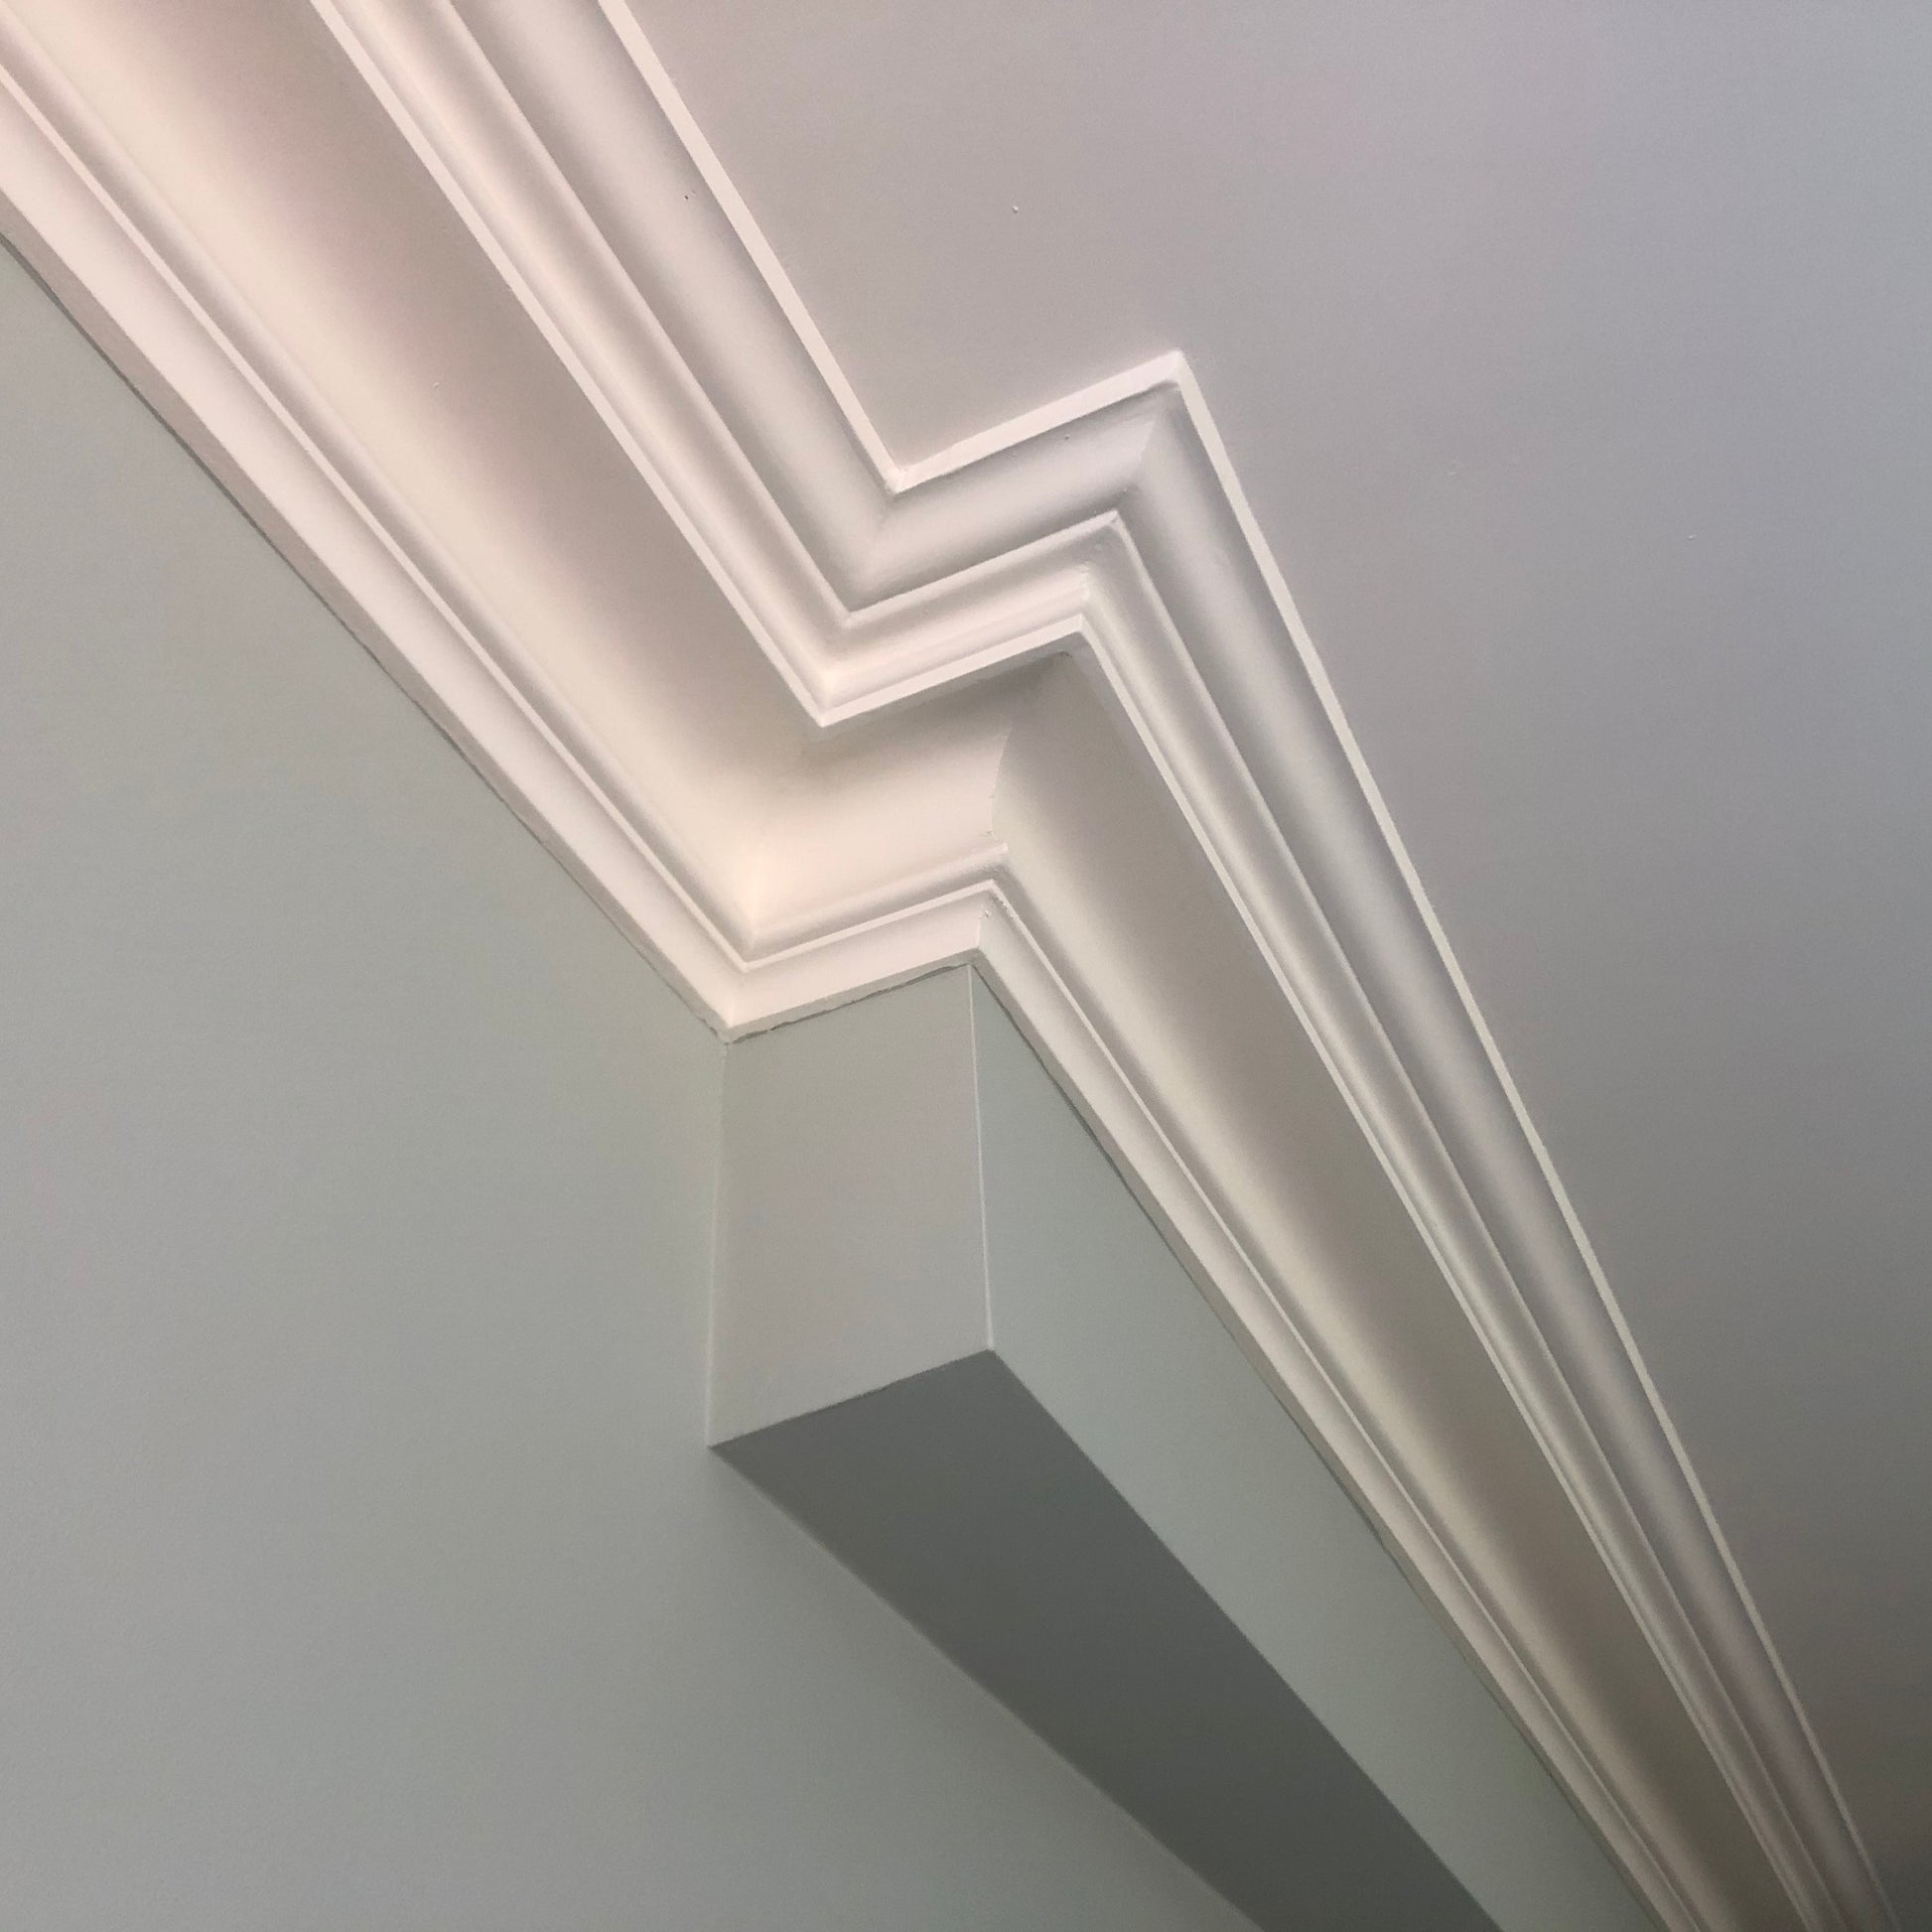 Victorian Swan Neck coving detailing from below